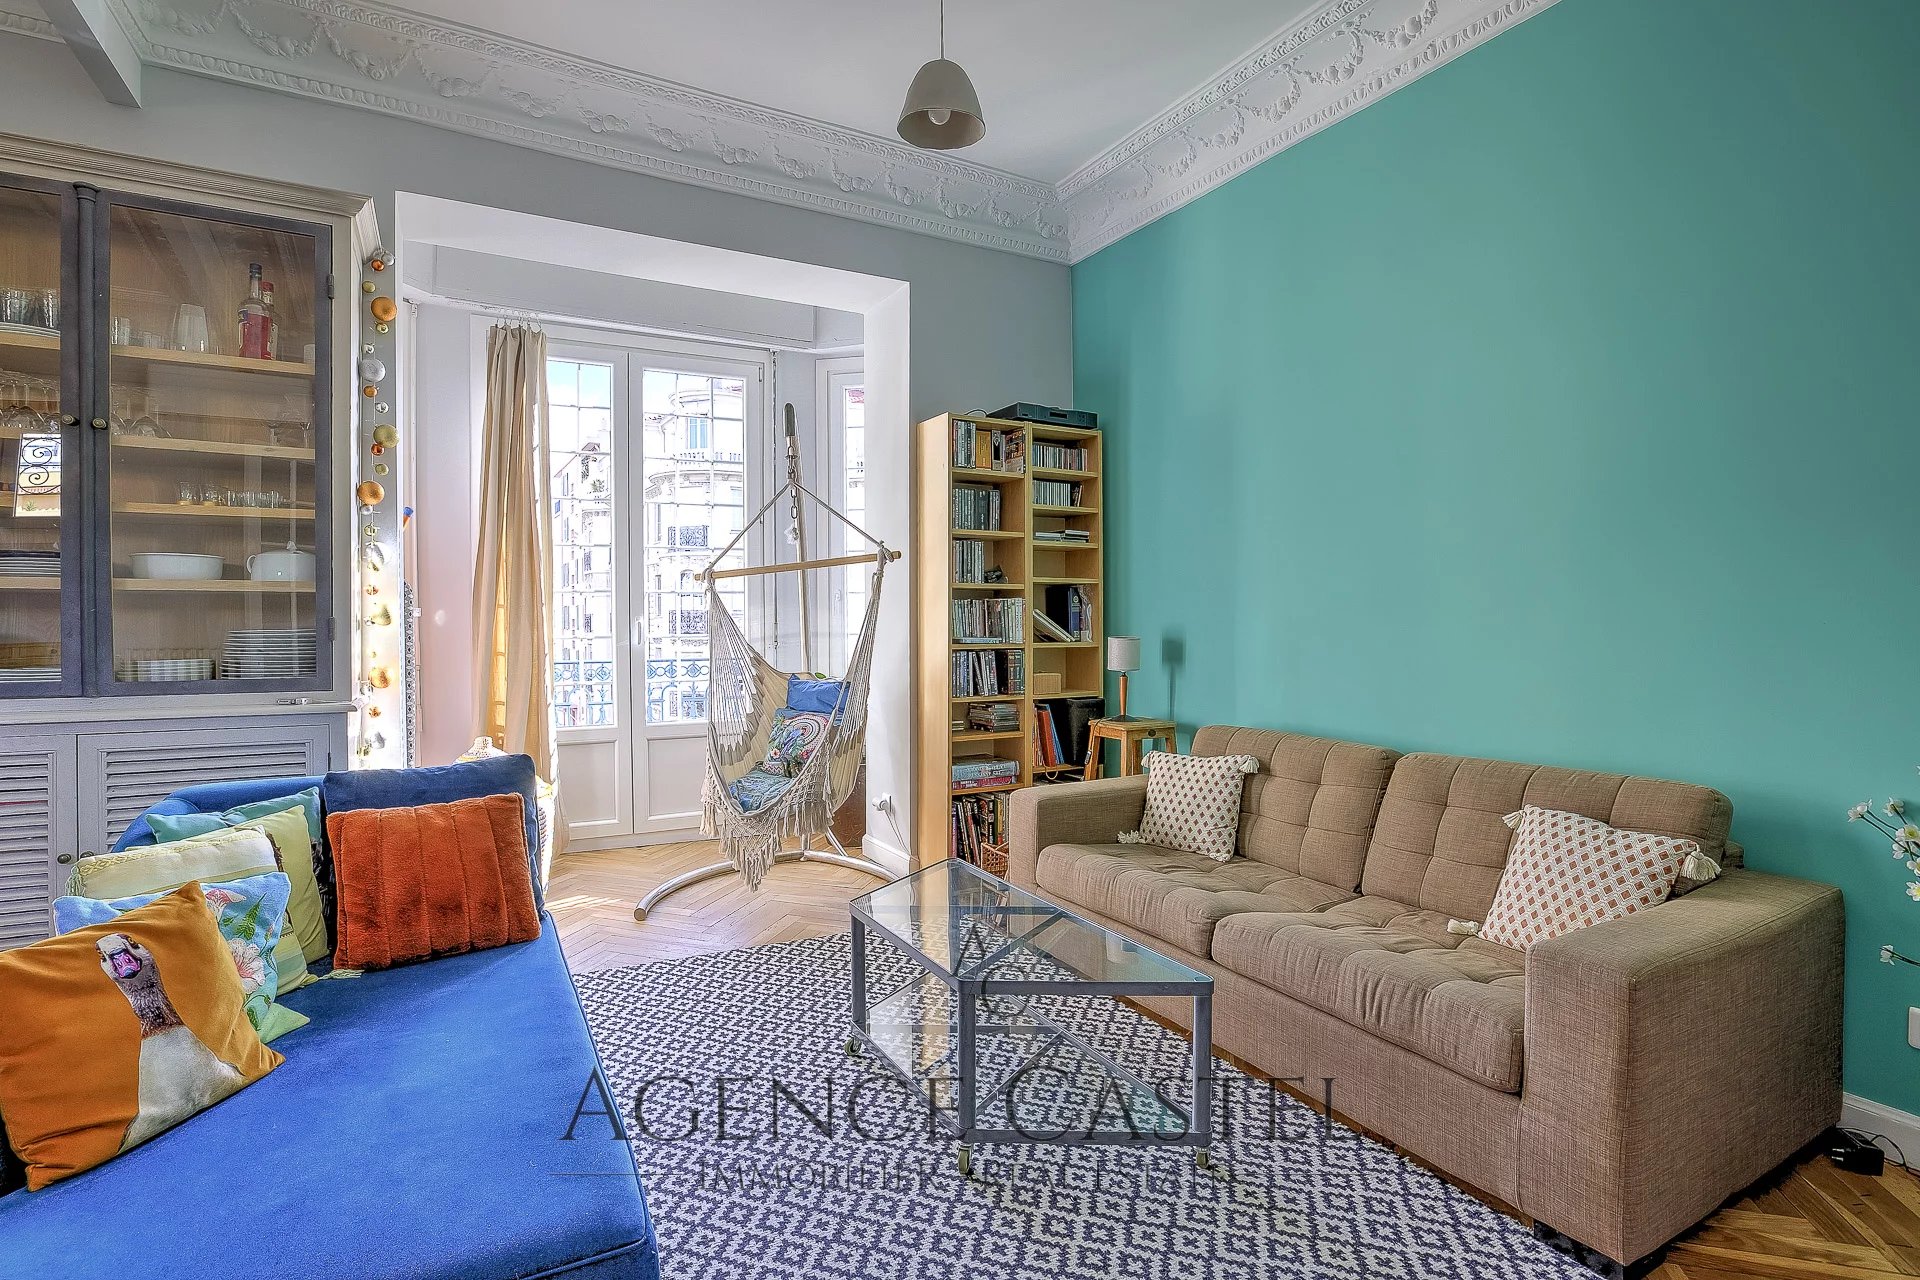 NICE CENTER - SUPERB 4 BEDROOM APARTMENT WITH BOW WINDOWS